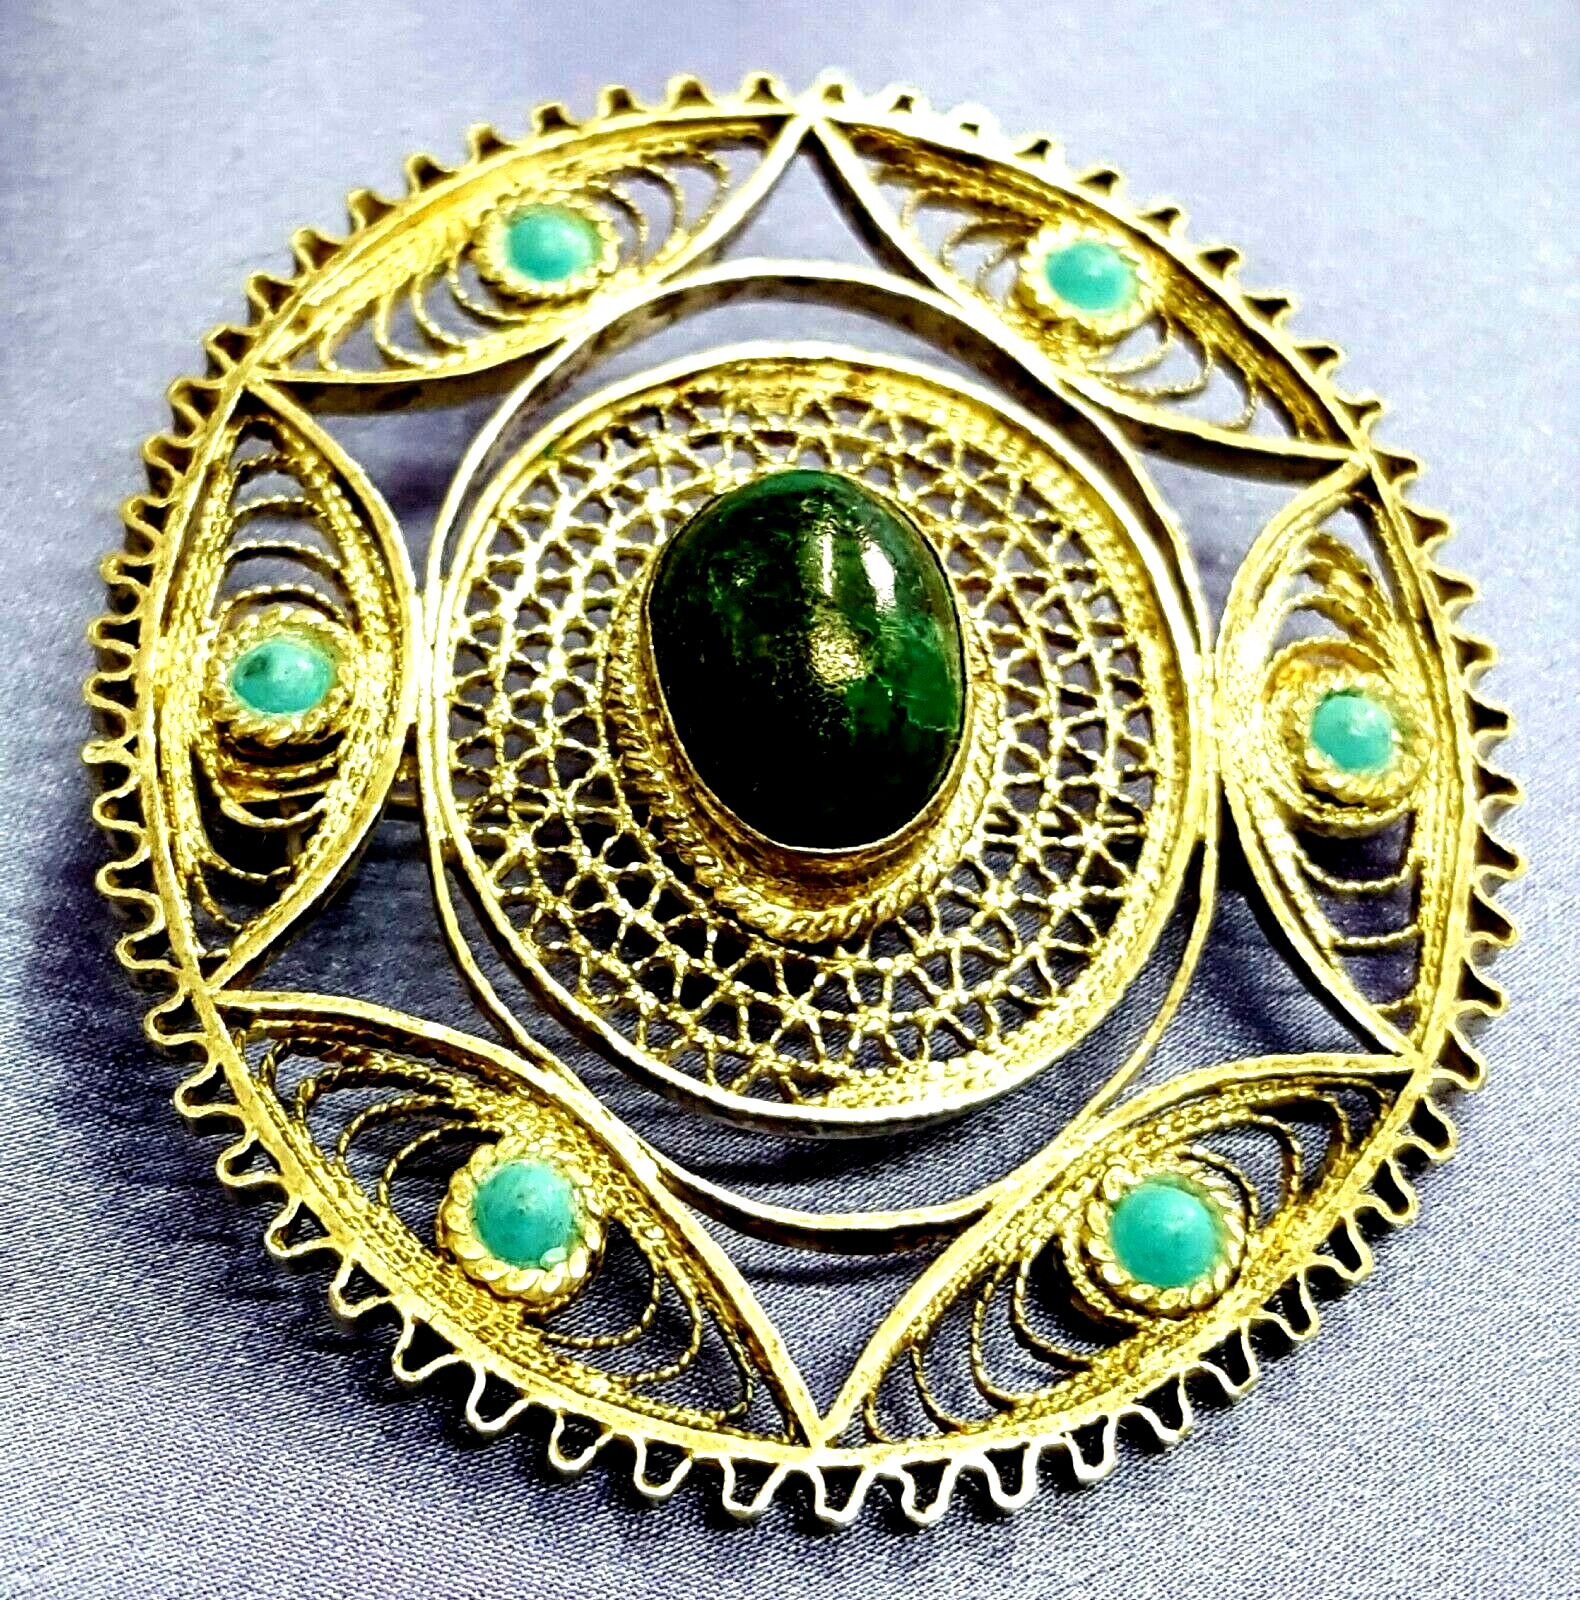 Broach 925 silver Signed filigree Signature of Israel set with Turquoise stones.